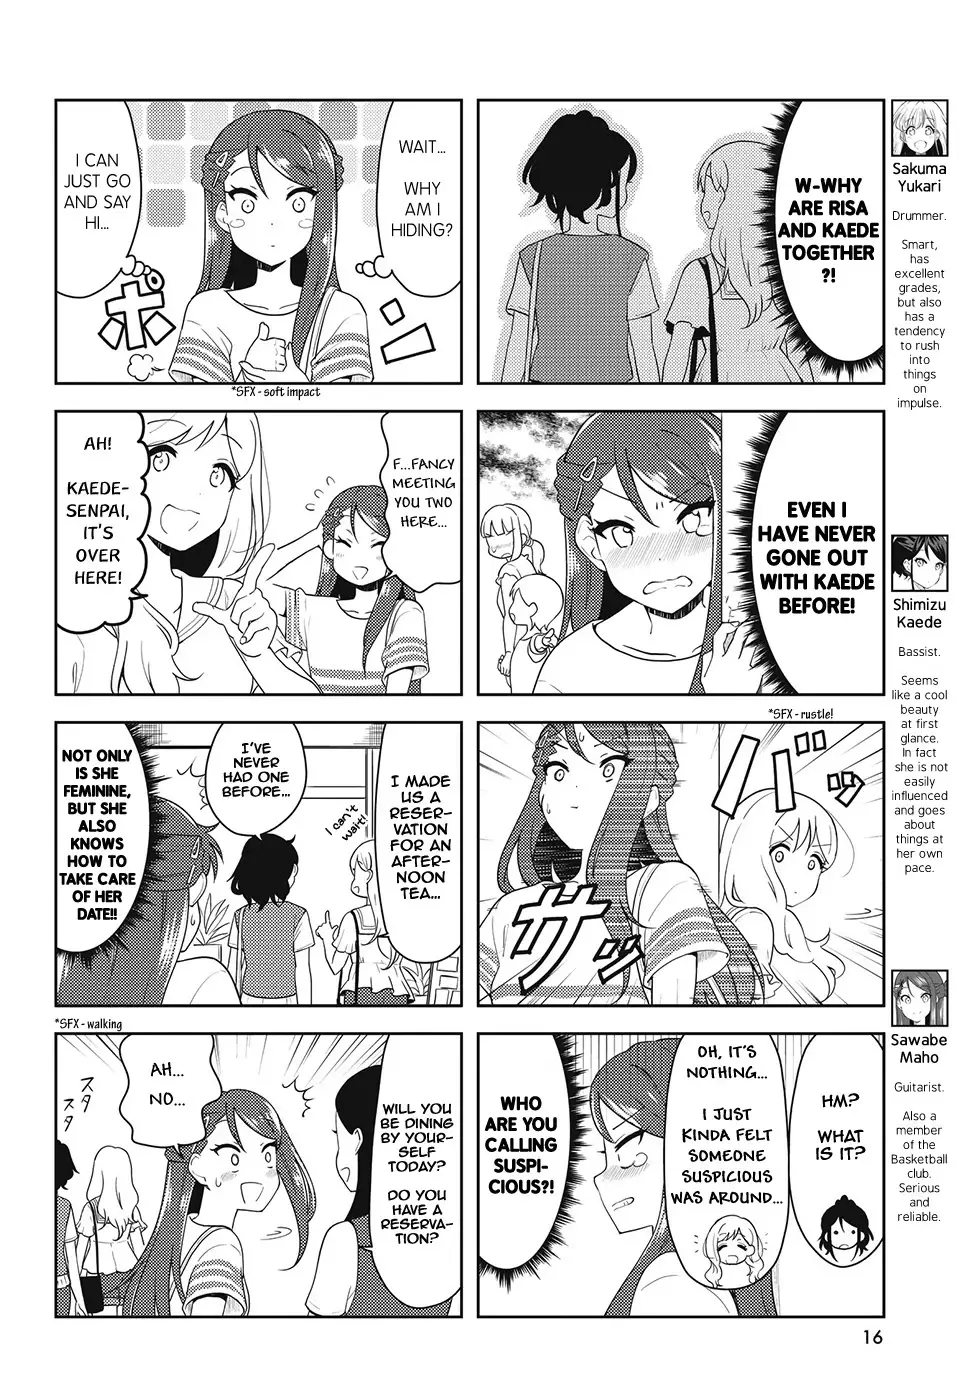 K-On! Shuffle - 31 page 2-ef2943fc